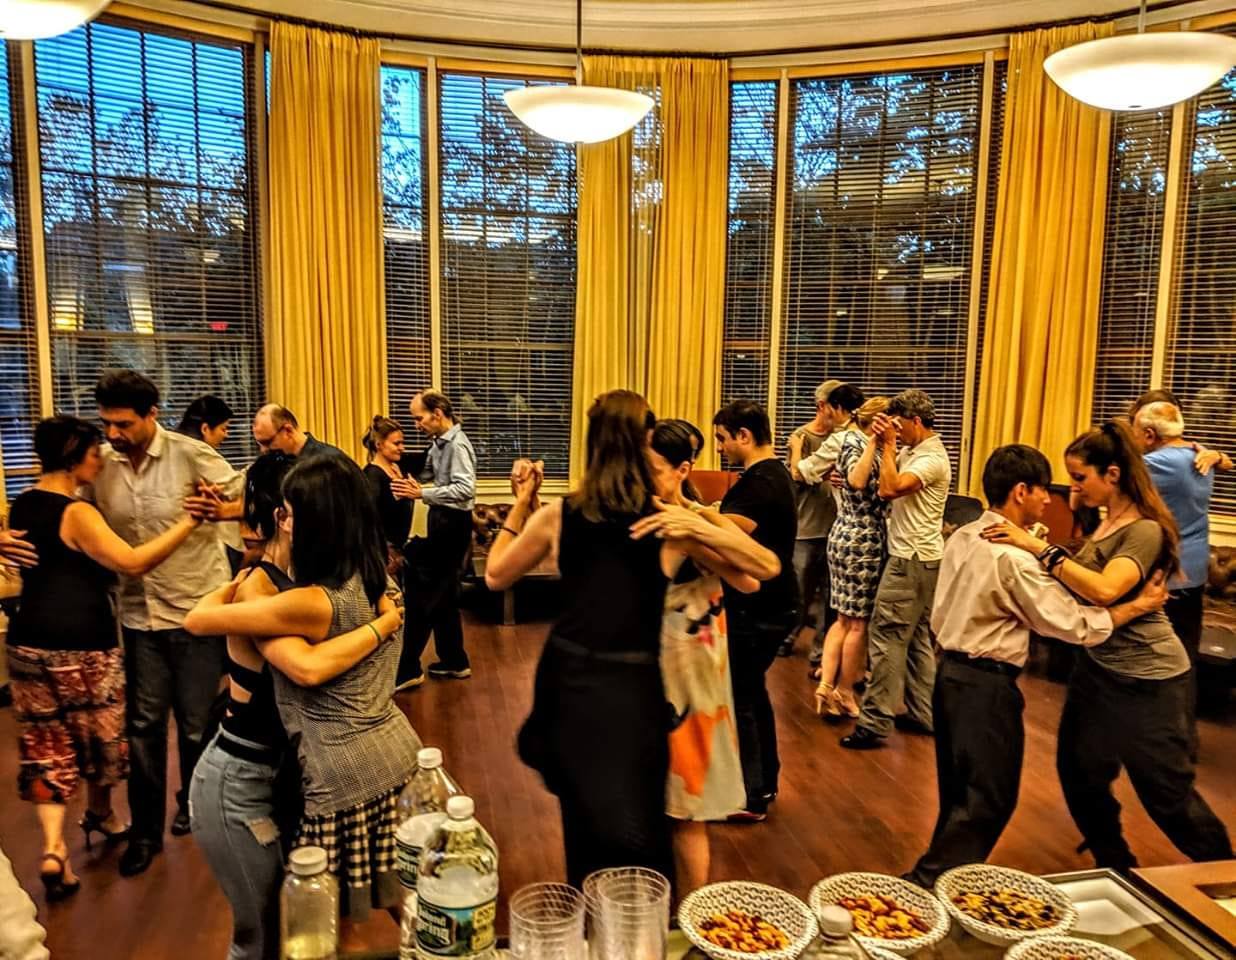 Ballroom with multiple pairs dancing together and a table with snacks is at the lower corner.